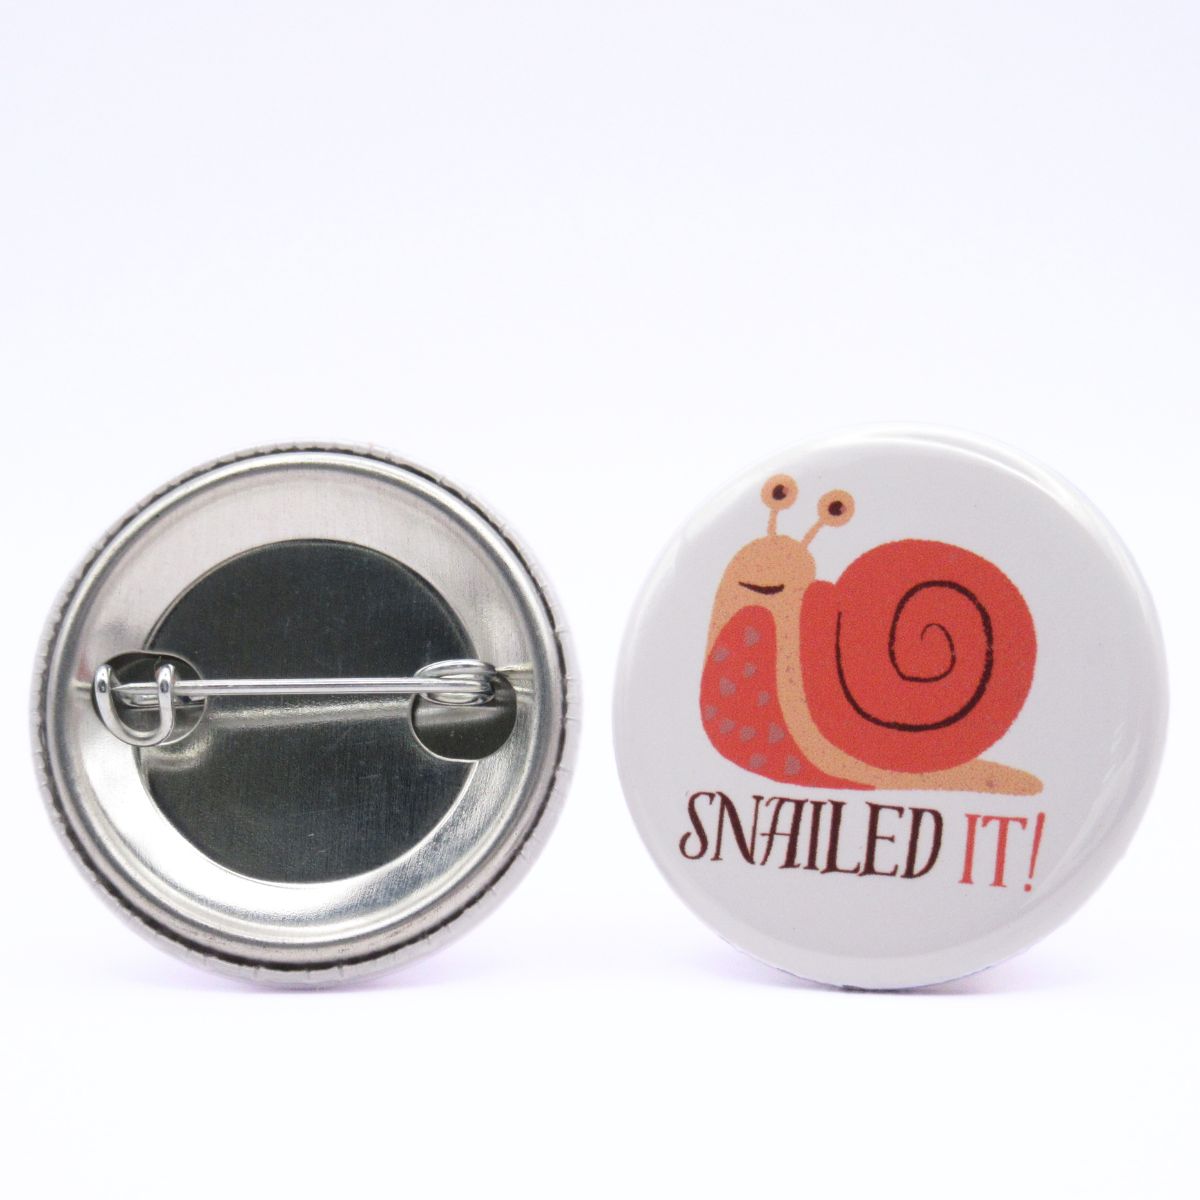 BooBooRoo Pinback Button (i.e. button, badge, pin) of a snail and the saying, "Snailed it!" Image showing front and back of high-quality metal button.